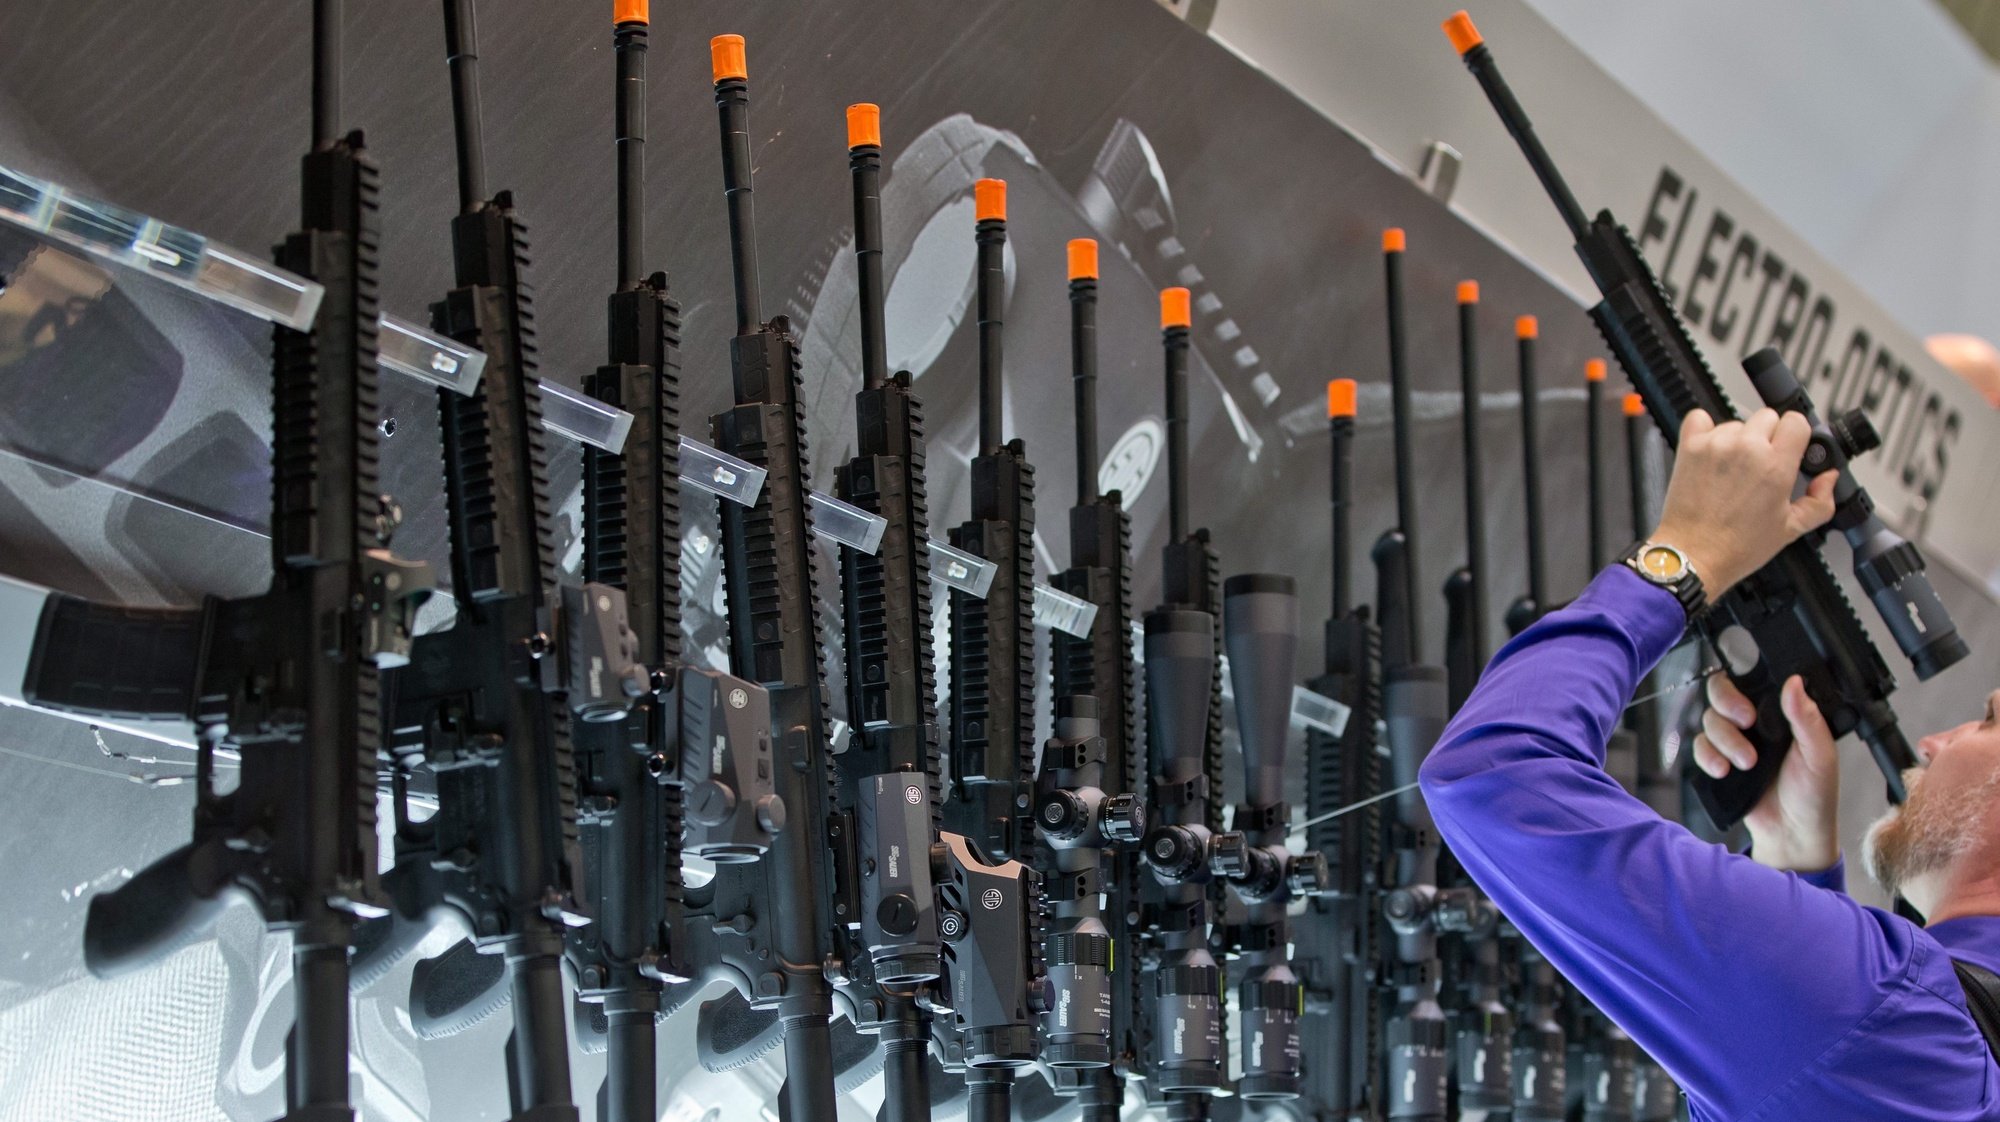 epa04650345 Rifles manufactured by SIG Sauer are on display at the IWA OutdoorClassics exhibition for Hunting Guns and Outdoor Equipment, in Nuremberg, Germany, 06 March 2015. The fair for &#039;High performance in target sport, nature activities, protecting people&#039; runs from 06 to 09 March 2015.  EPA/DANIEL KARMANN